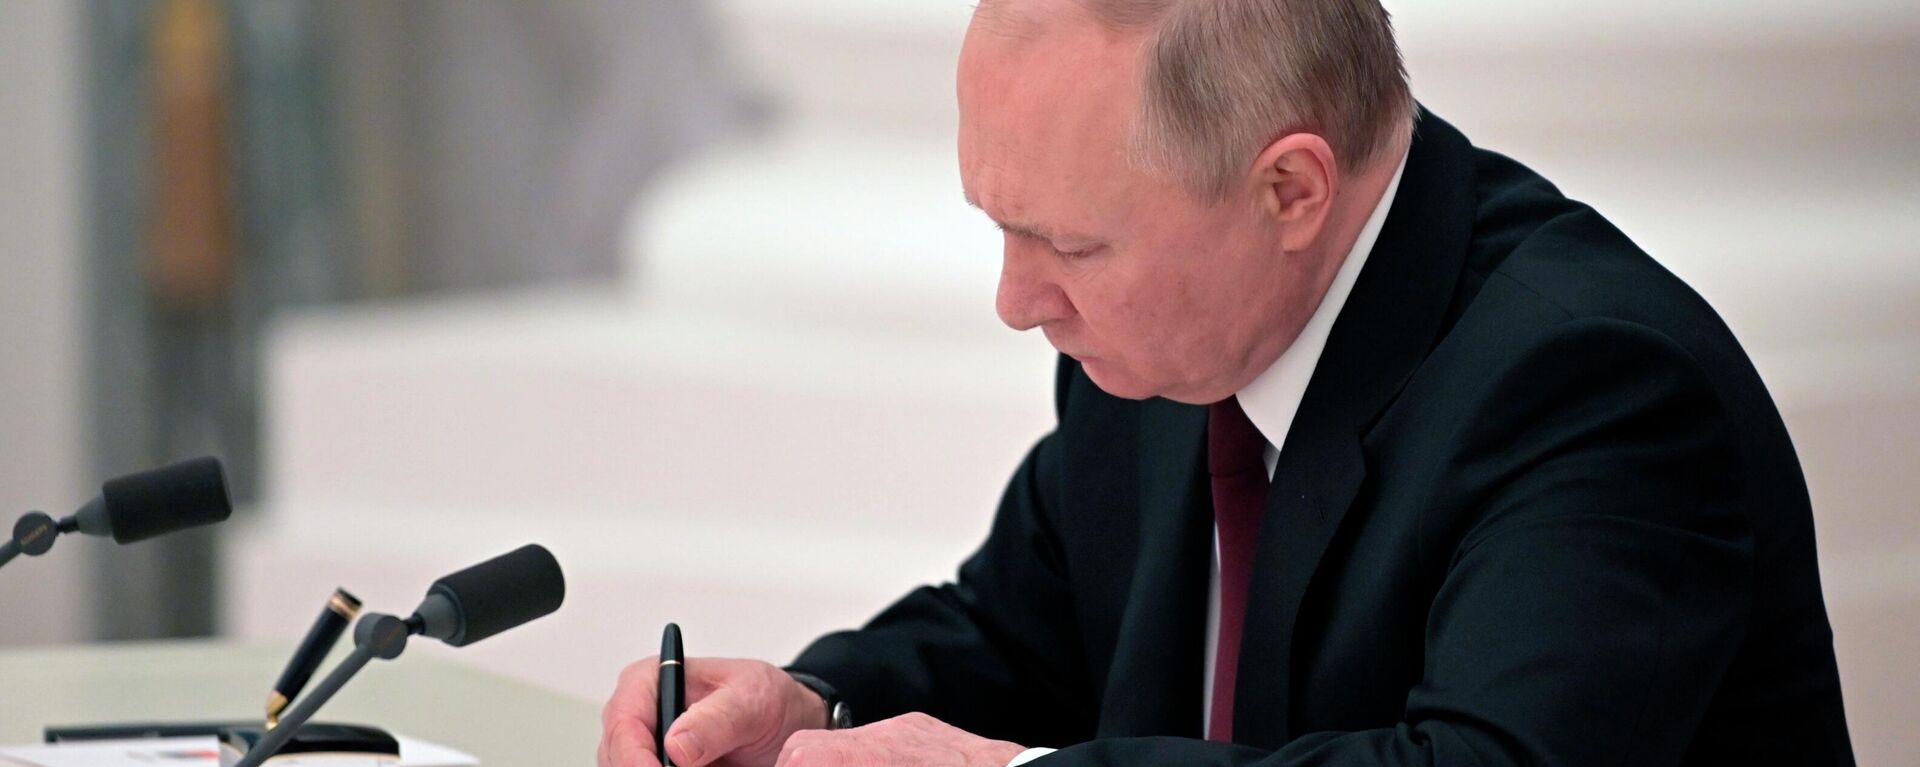 Russian President Vladimir Putin signs a document recognizing the independence of separatist regions in eastern Ukraine in the Kremlin in Moscow, Russia, Monday, Feb. 21, 2022. Russia's Putin has recognized the independence of separatist regions in eastern Ukraine, raising tensions with West. - Sputnik International, 1920, 21.02.2022